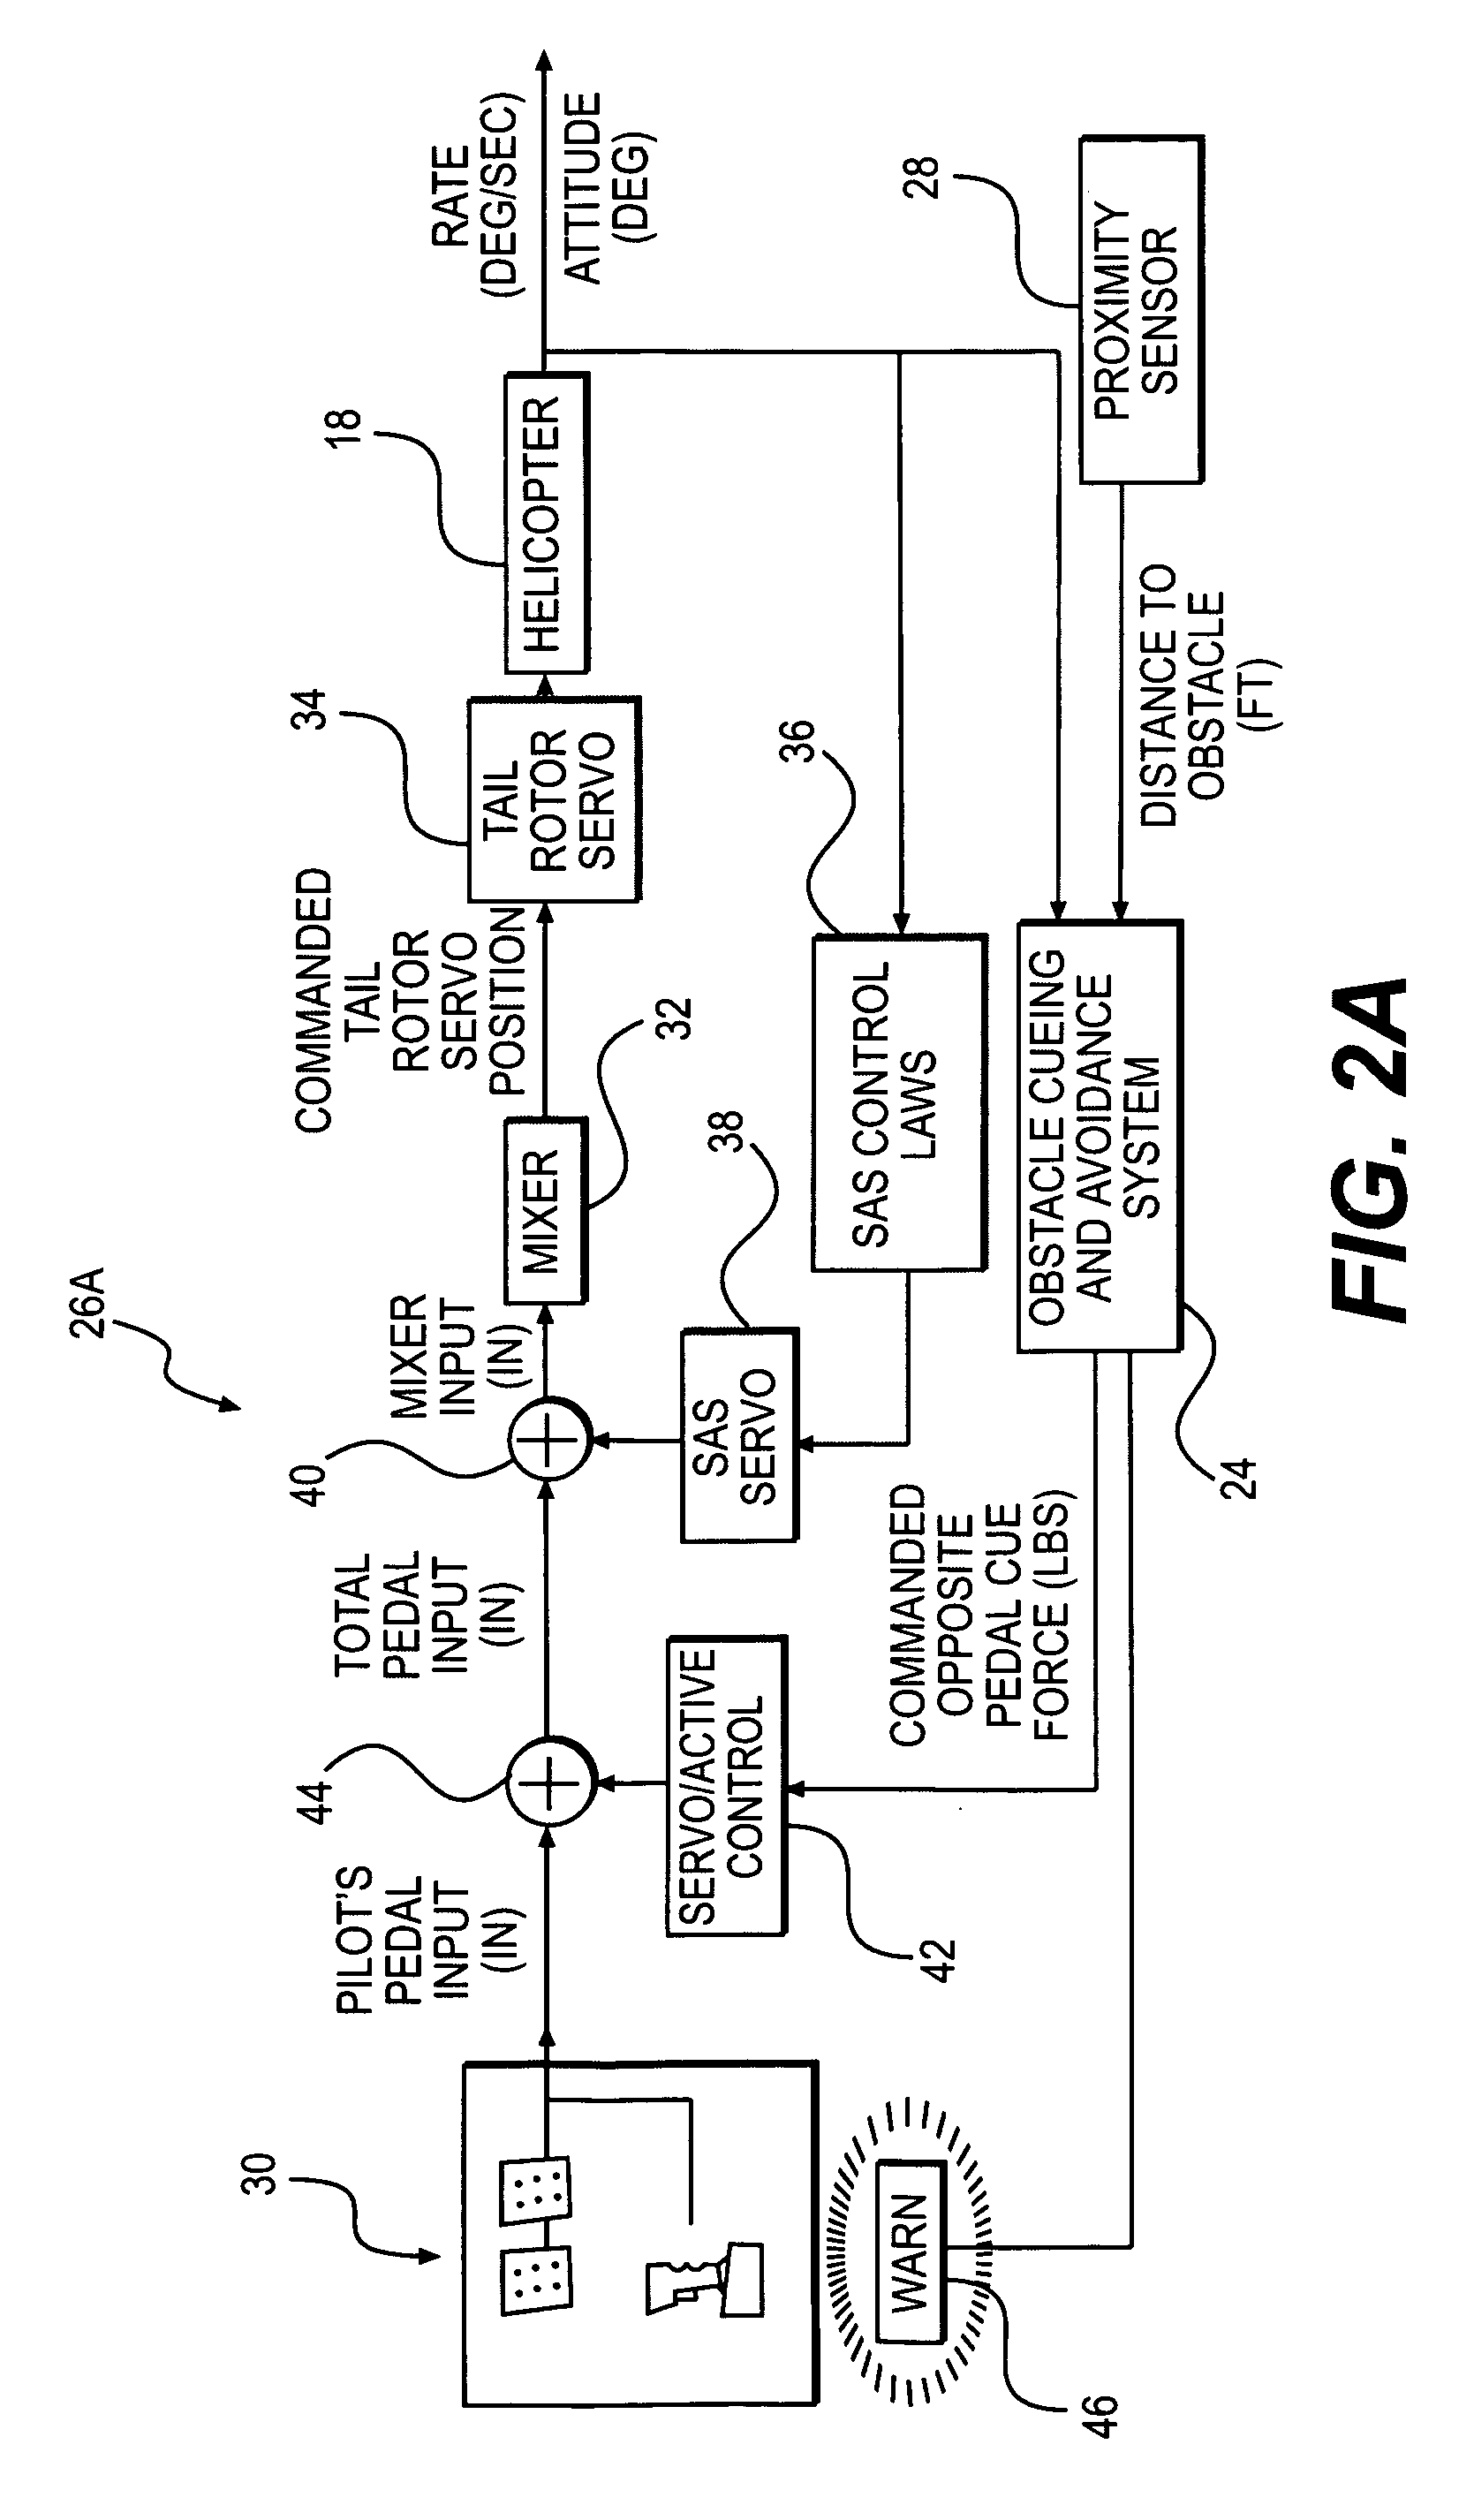 Rotary wing aircraft flight control system with a proximity cueing and avoidance system